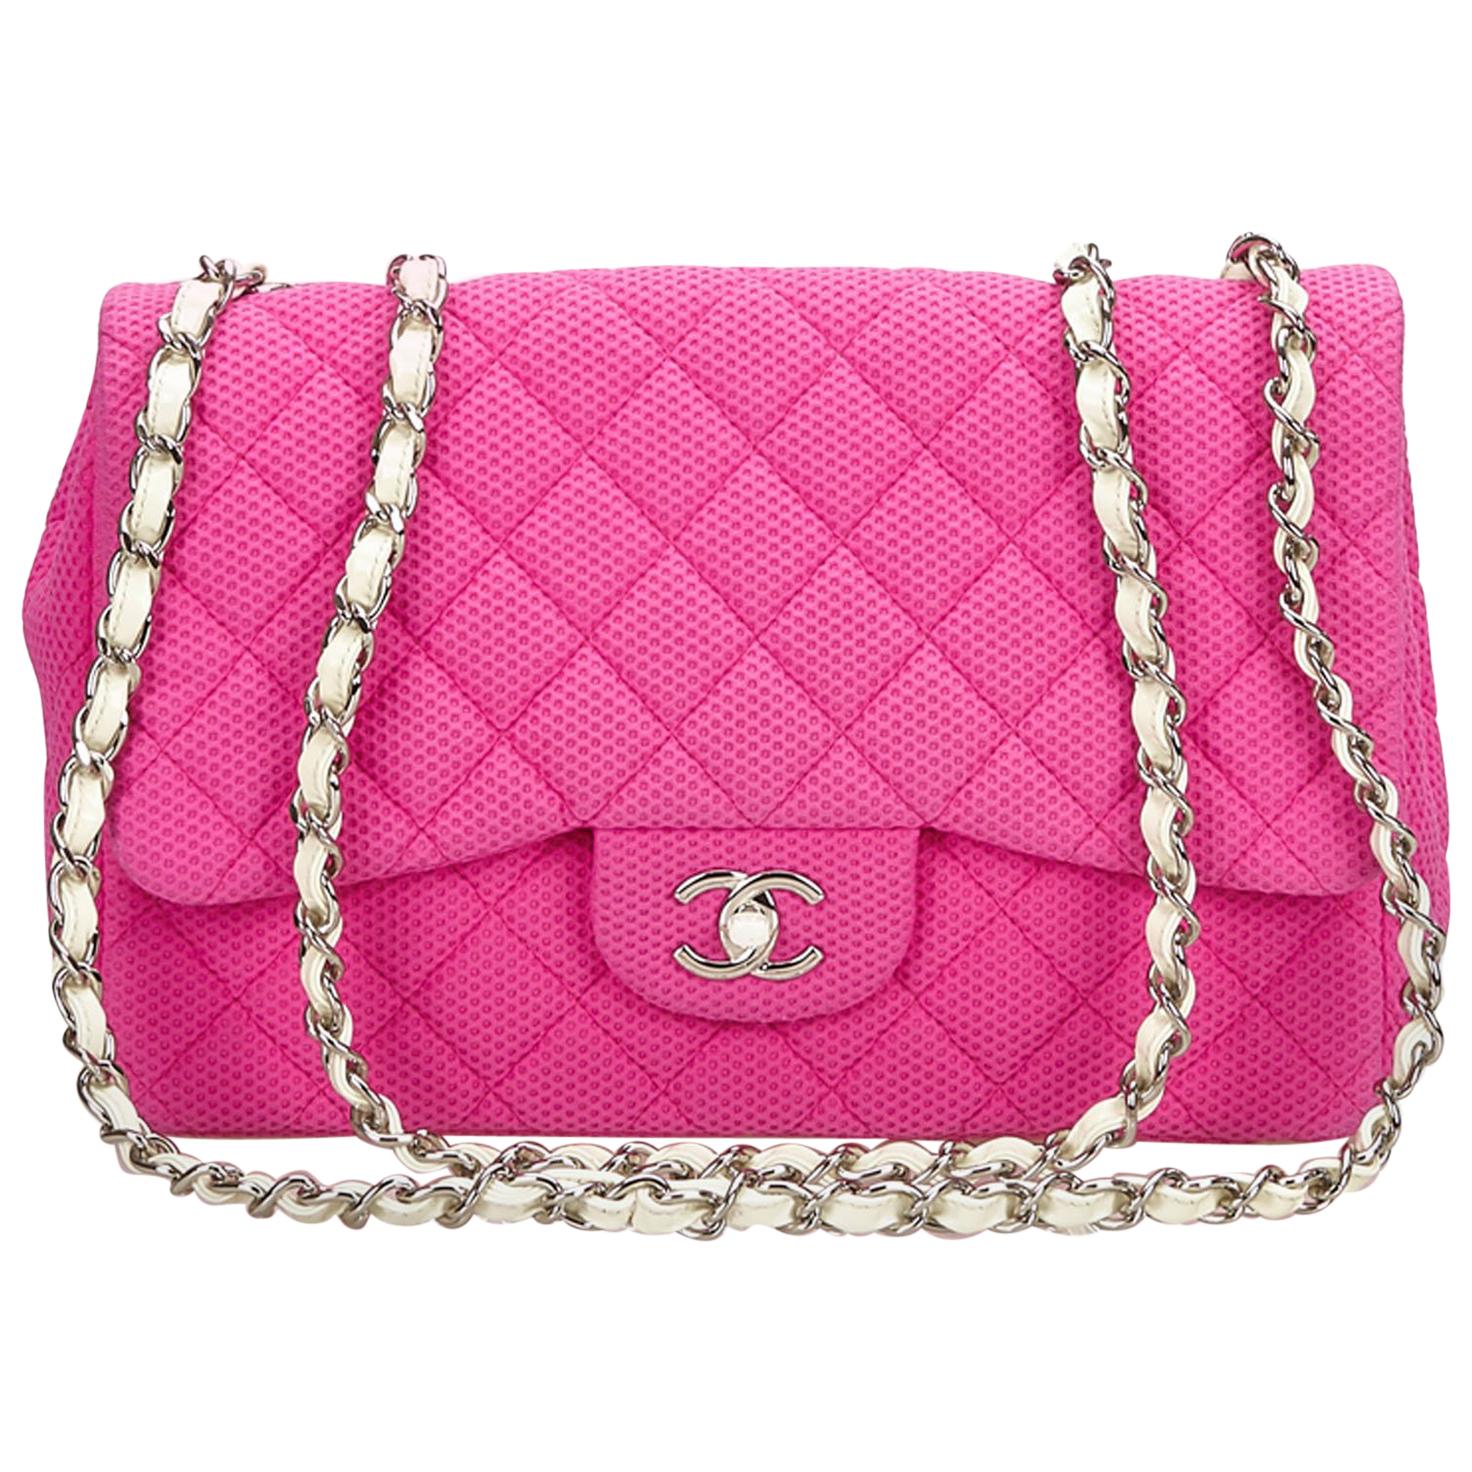 Chanel Pink and White Jumbo Cotton Flap Bag